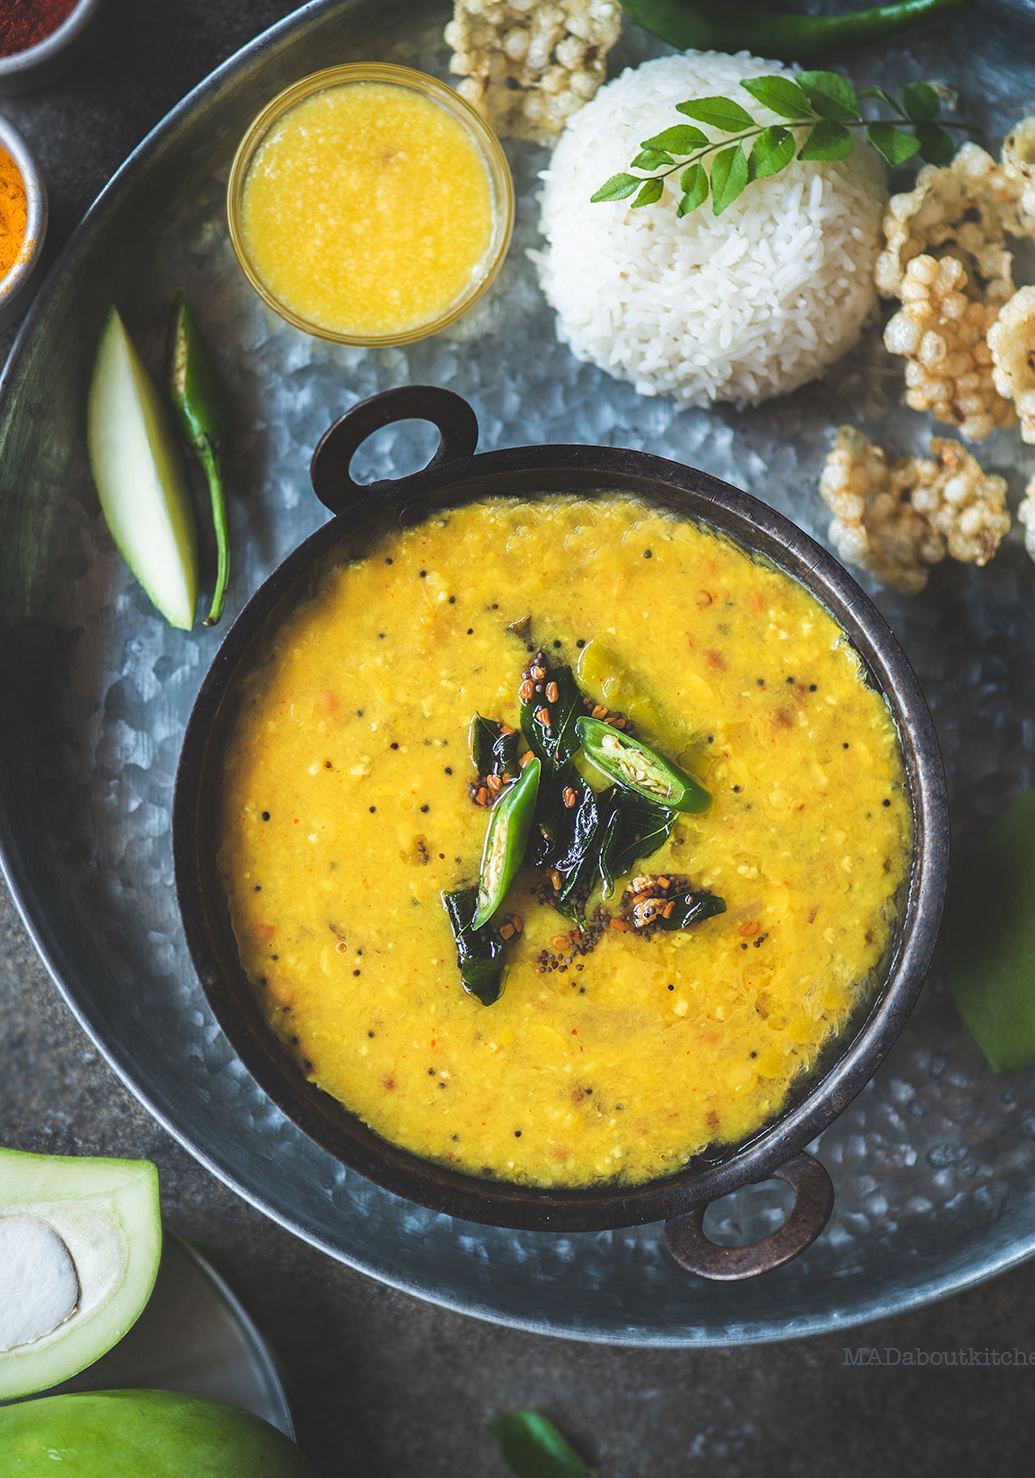 Mamidikaaya Pappu or the raw mango curry is a speciality from Andhra Pradesh. The sour ,spicy curry is served with steamed rice and ghee and some fryums.